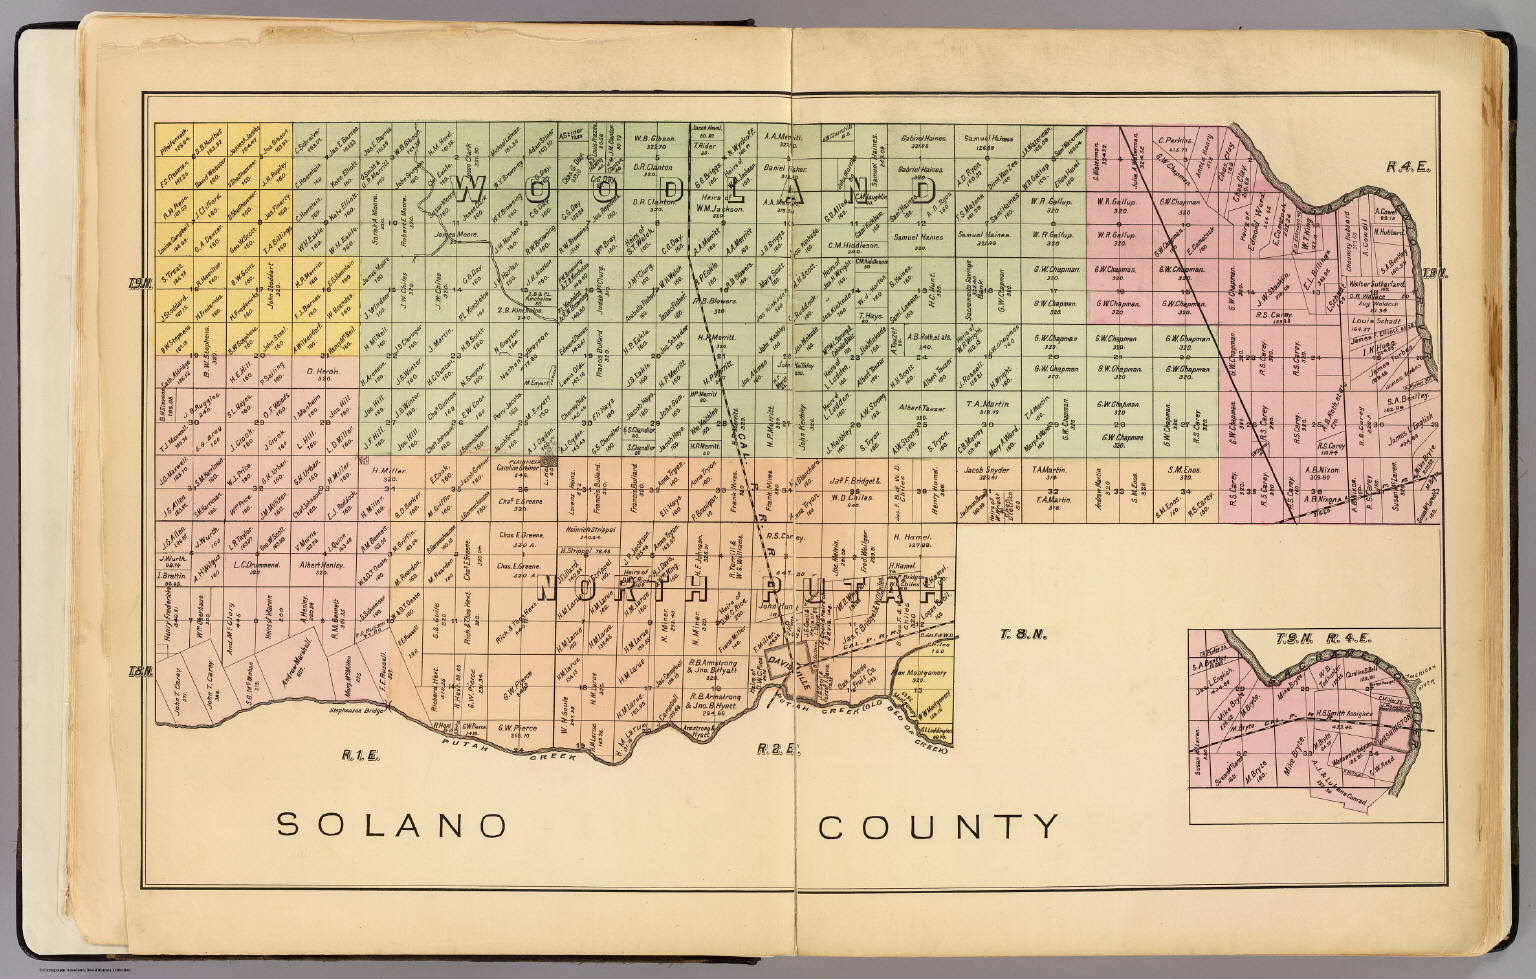 George Pierce's Farm Appears in the Bottom Center, Map of Yolo County, CA. Pierce Family Papers, Special Collections, University of California, Davis Library.